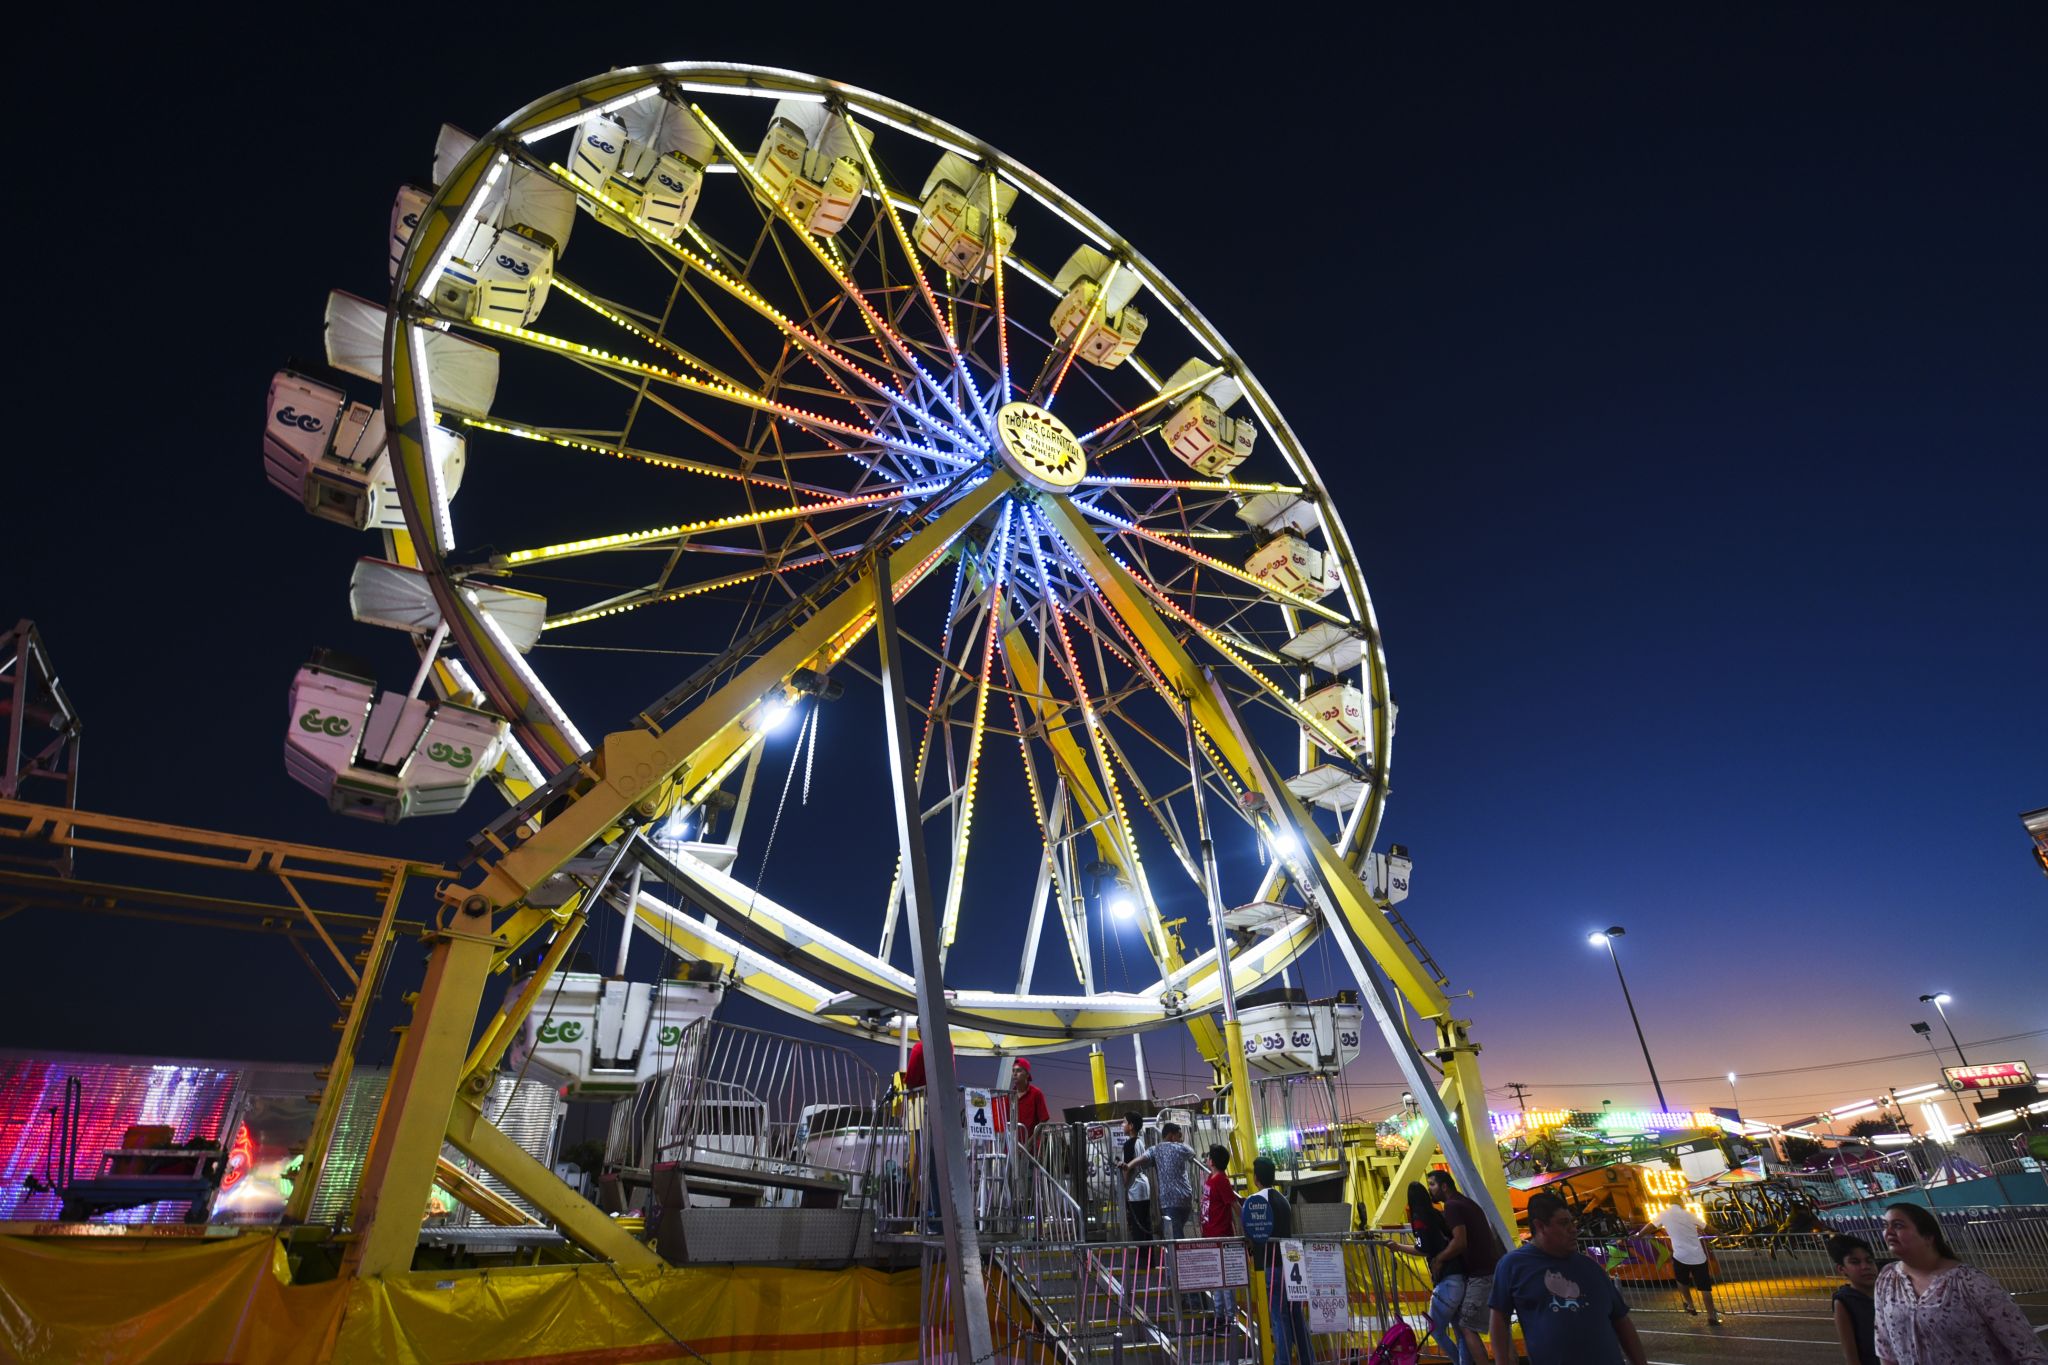 Fall Carnival Extravaganza will bring all the thrills to Laredo